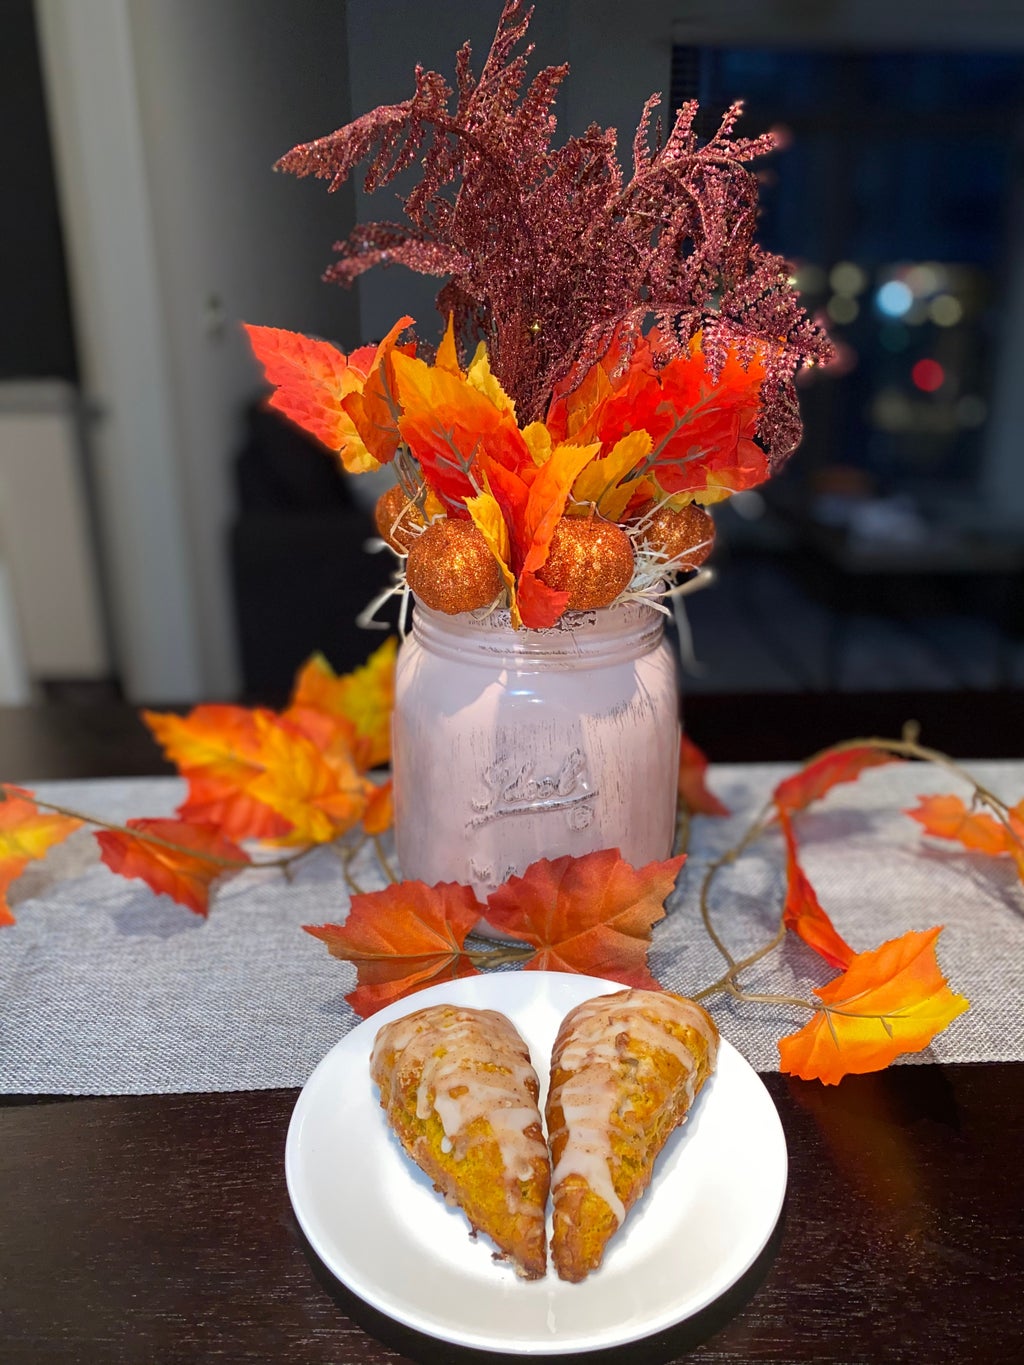 completed fall centerpiece with two pumpkin spice scones in front